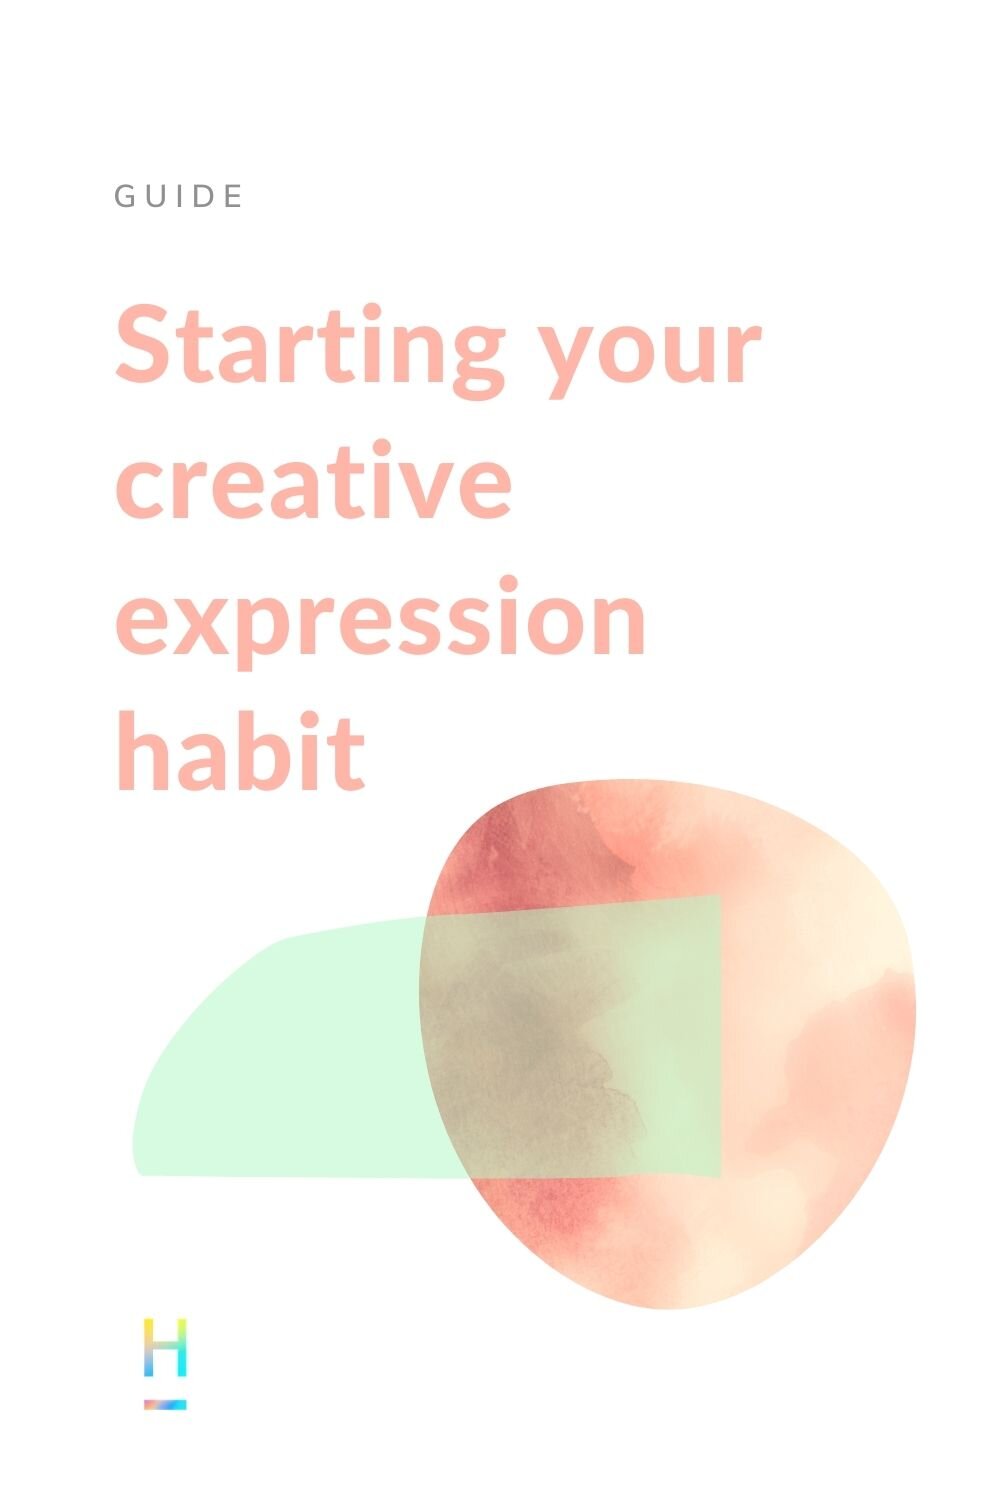 Starting your creative expression habit